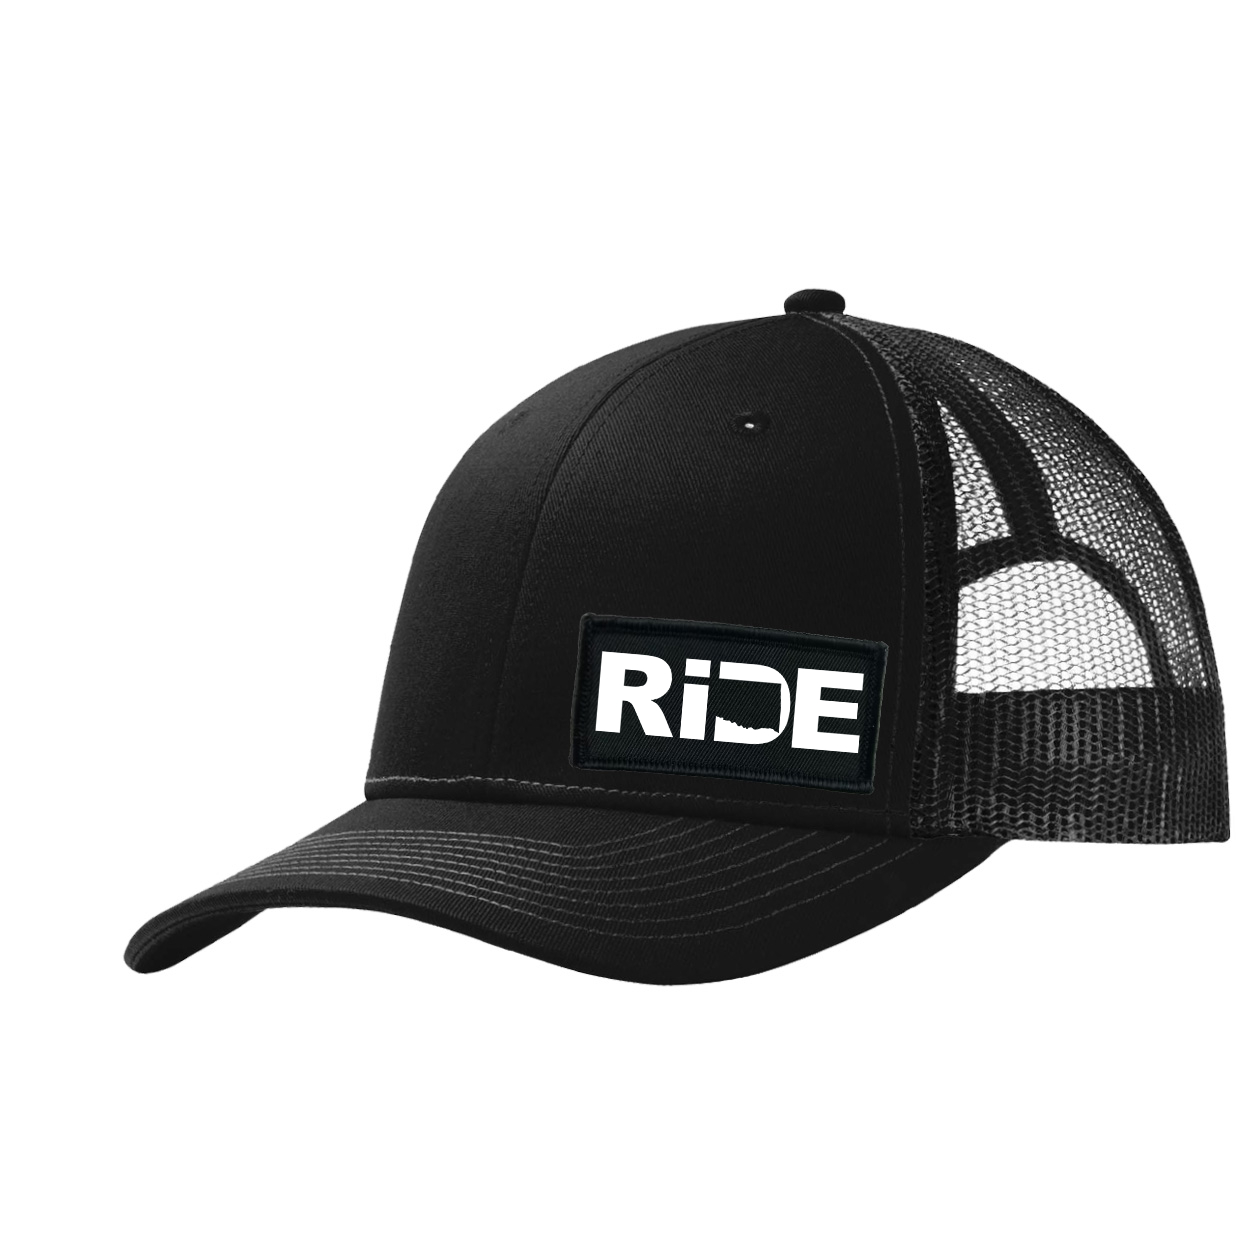 Ride Oklahoma Night Out Woven Patch Snapback Trucker Hat Black (White Logo)